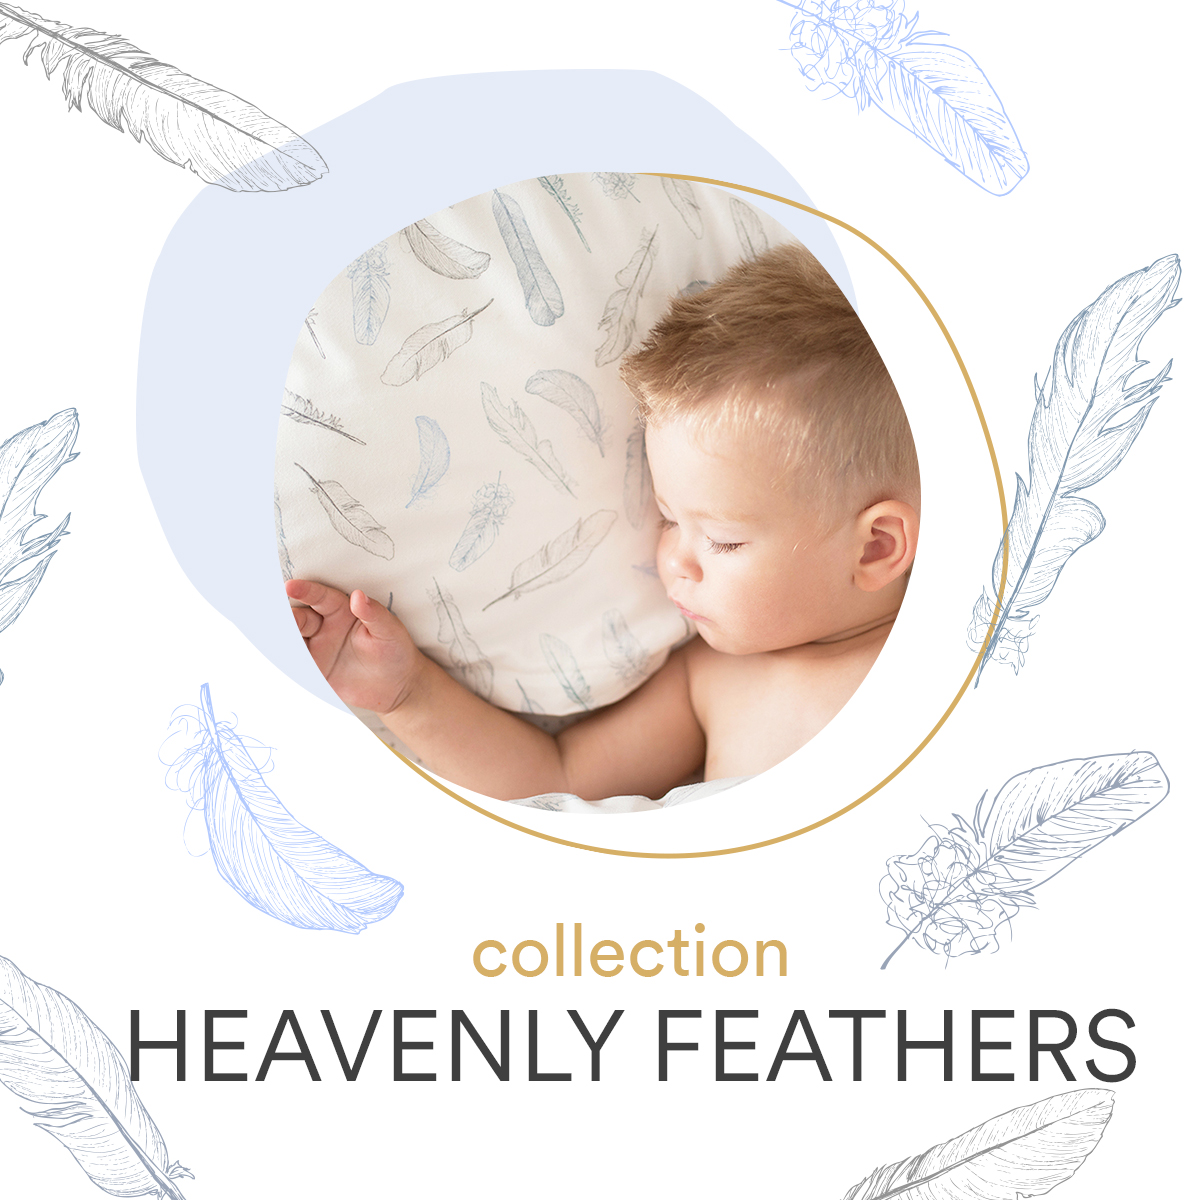 Heavenly feathers